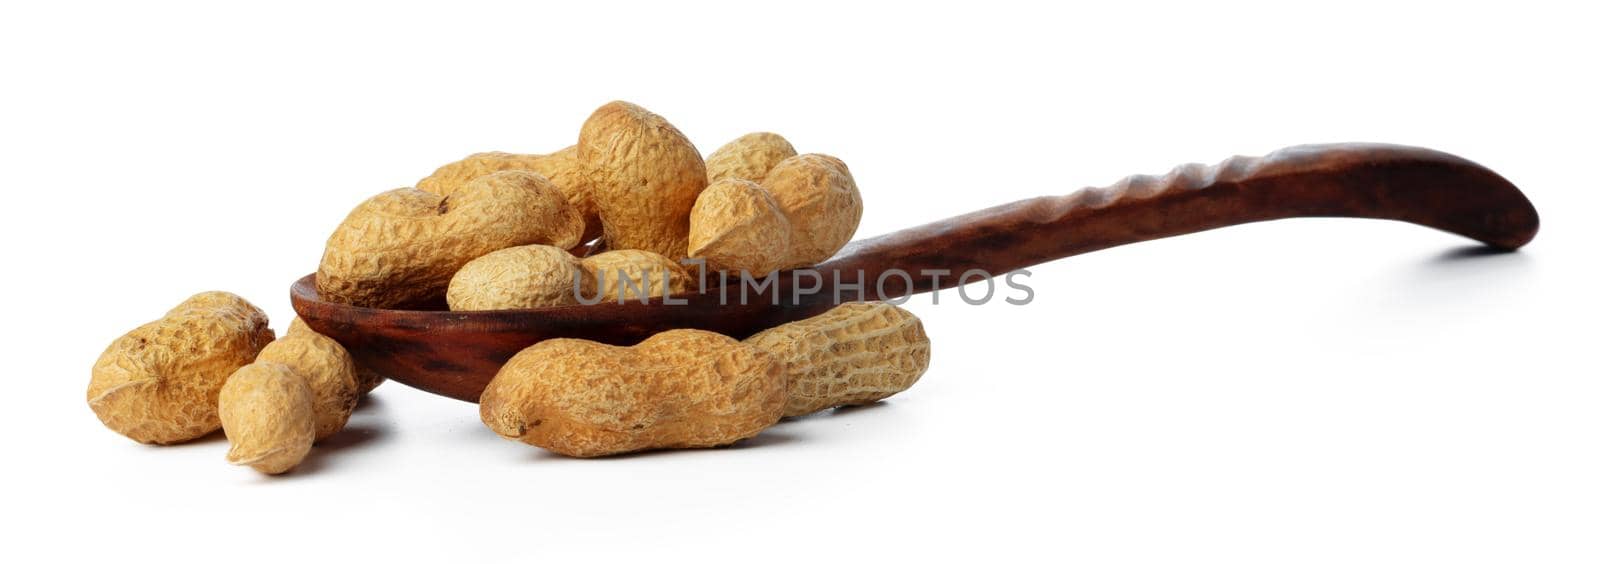 Spoon of peanuts in shell isolated on white background